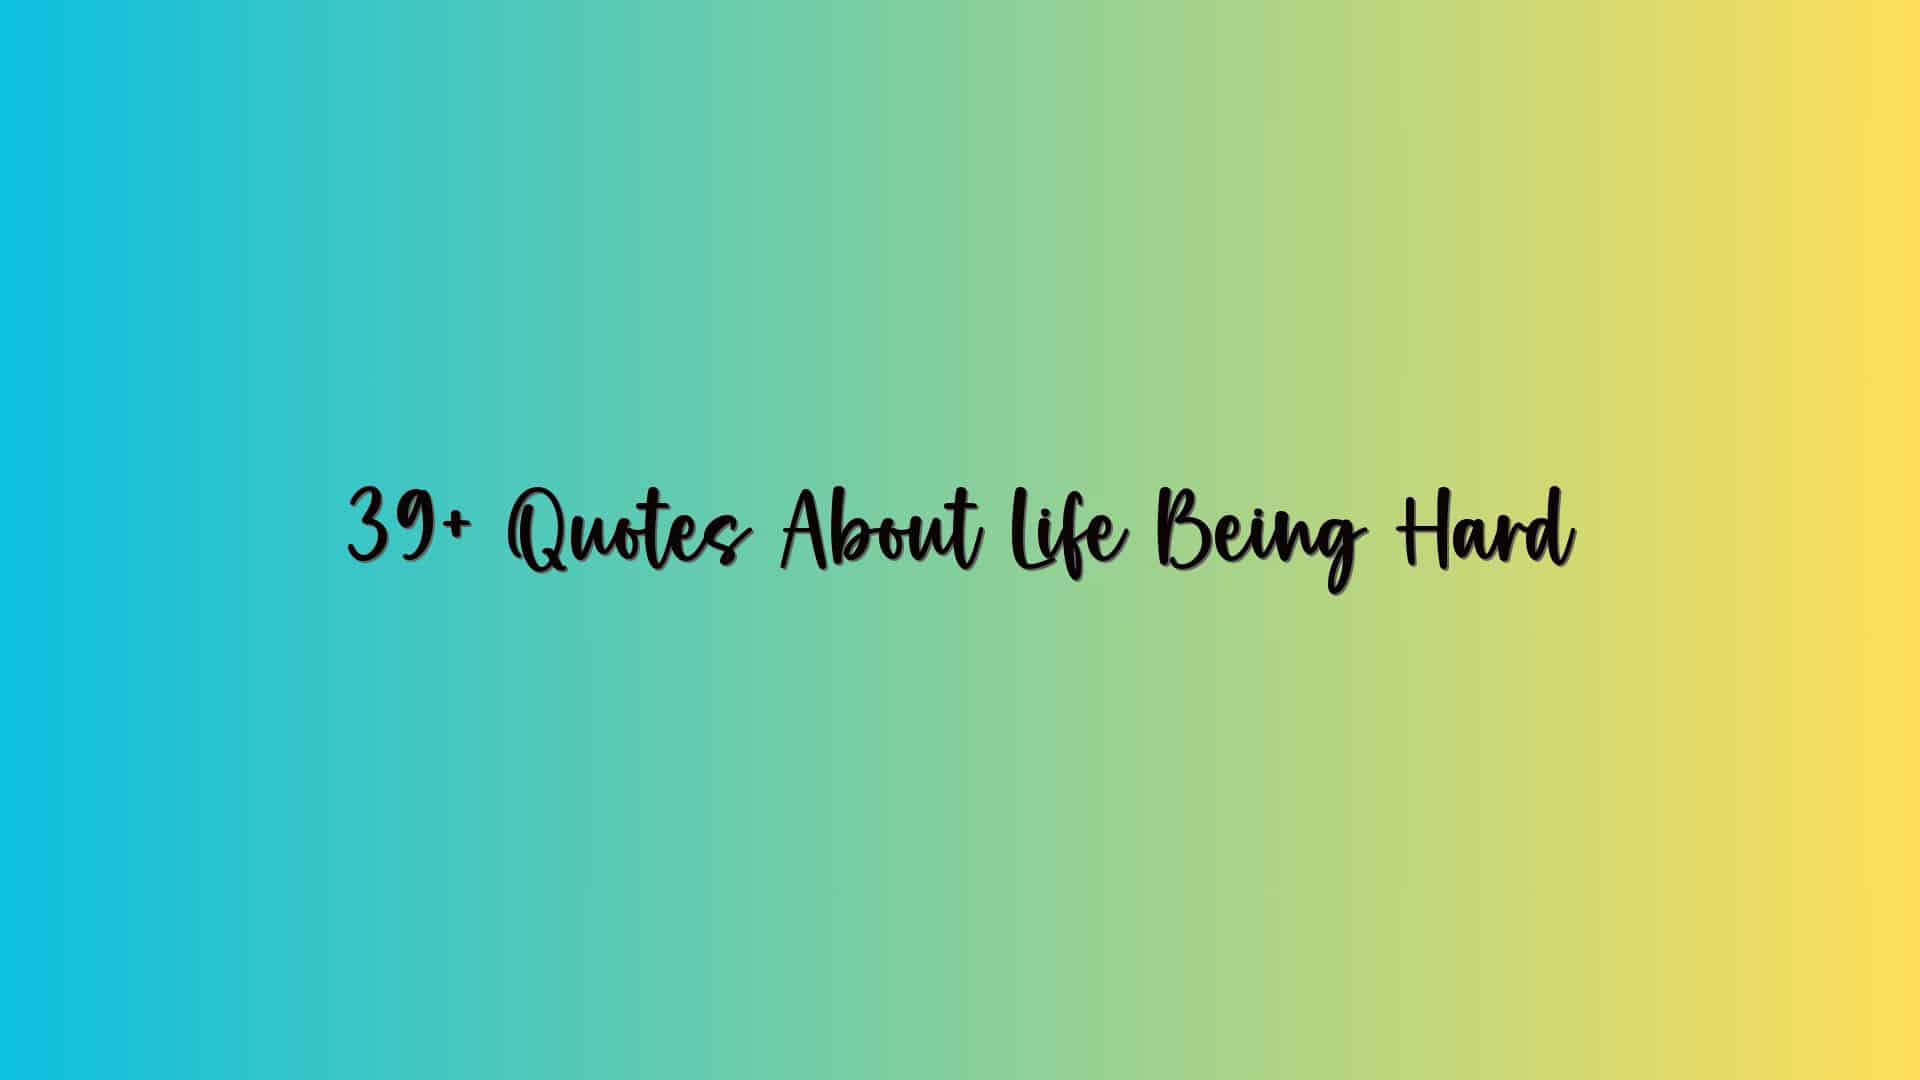 39+ Quotes About Life Being Hard